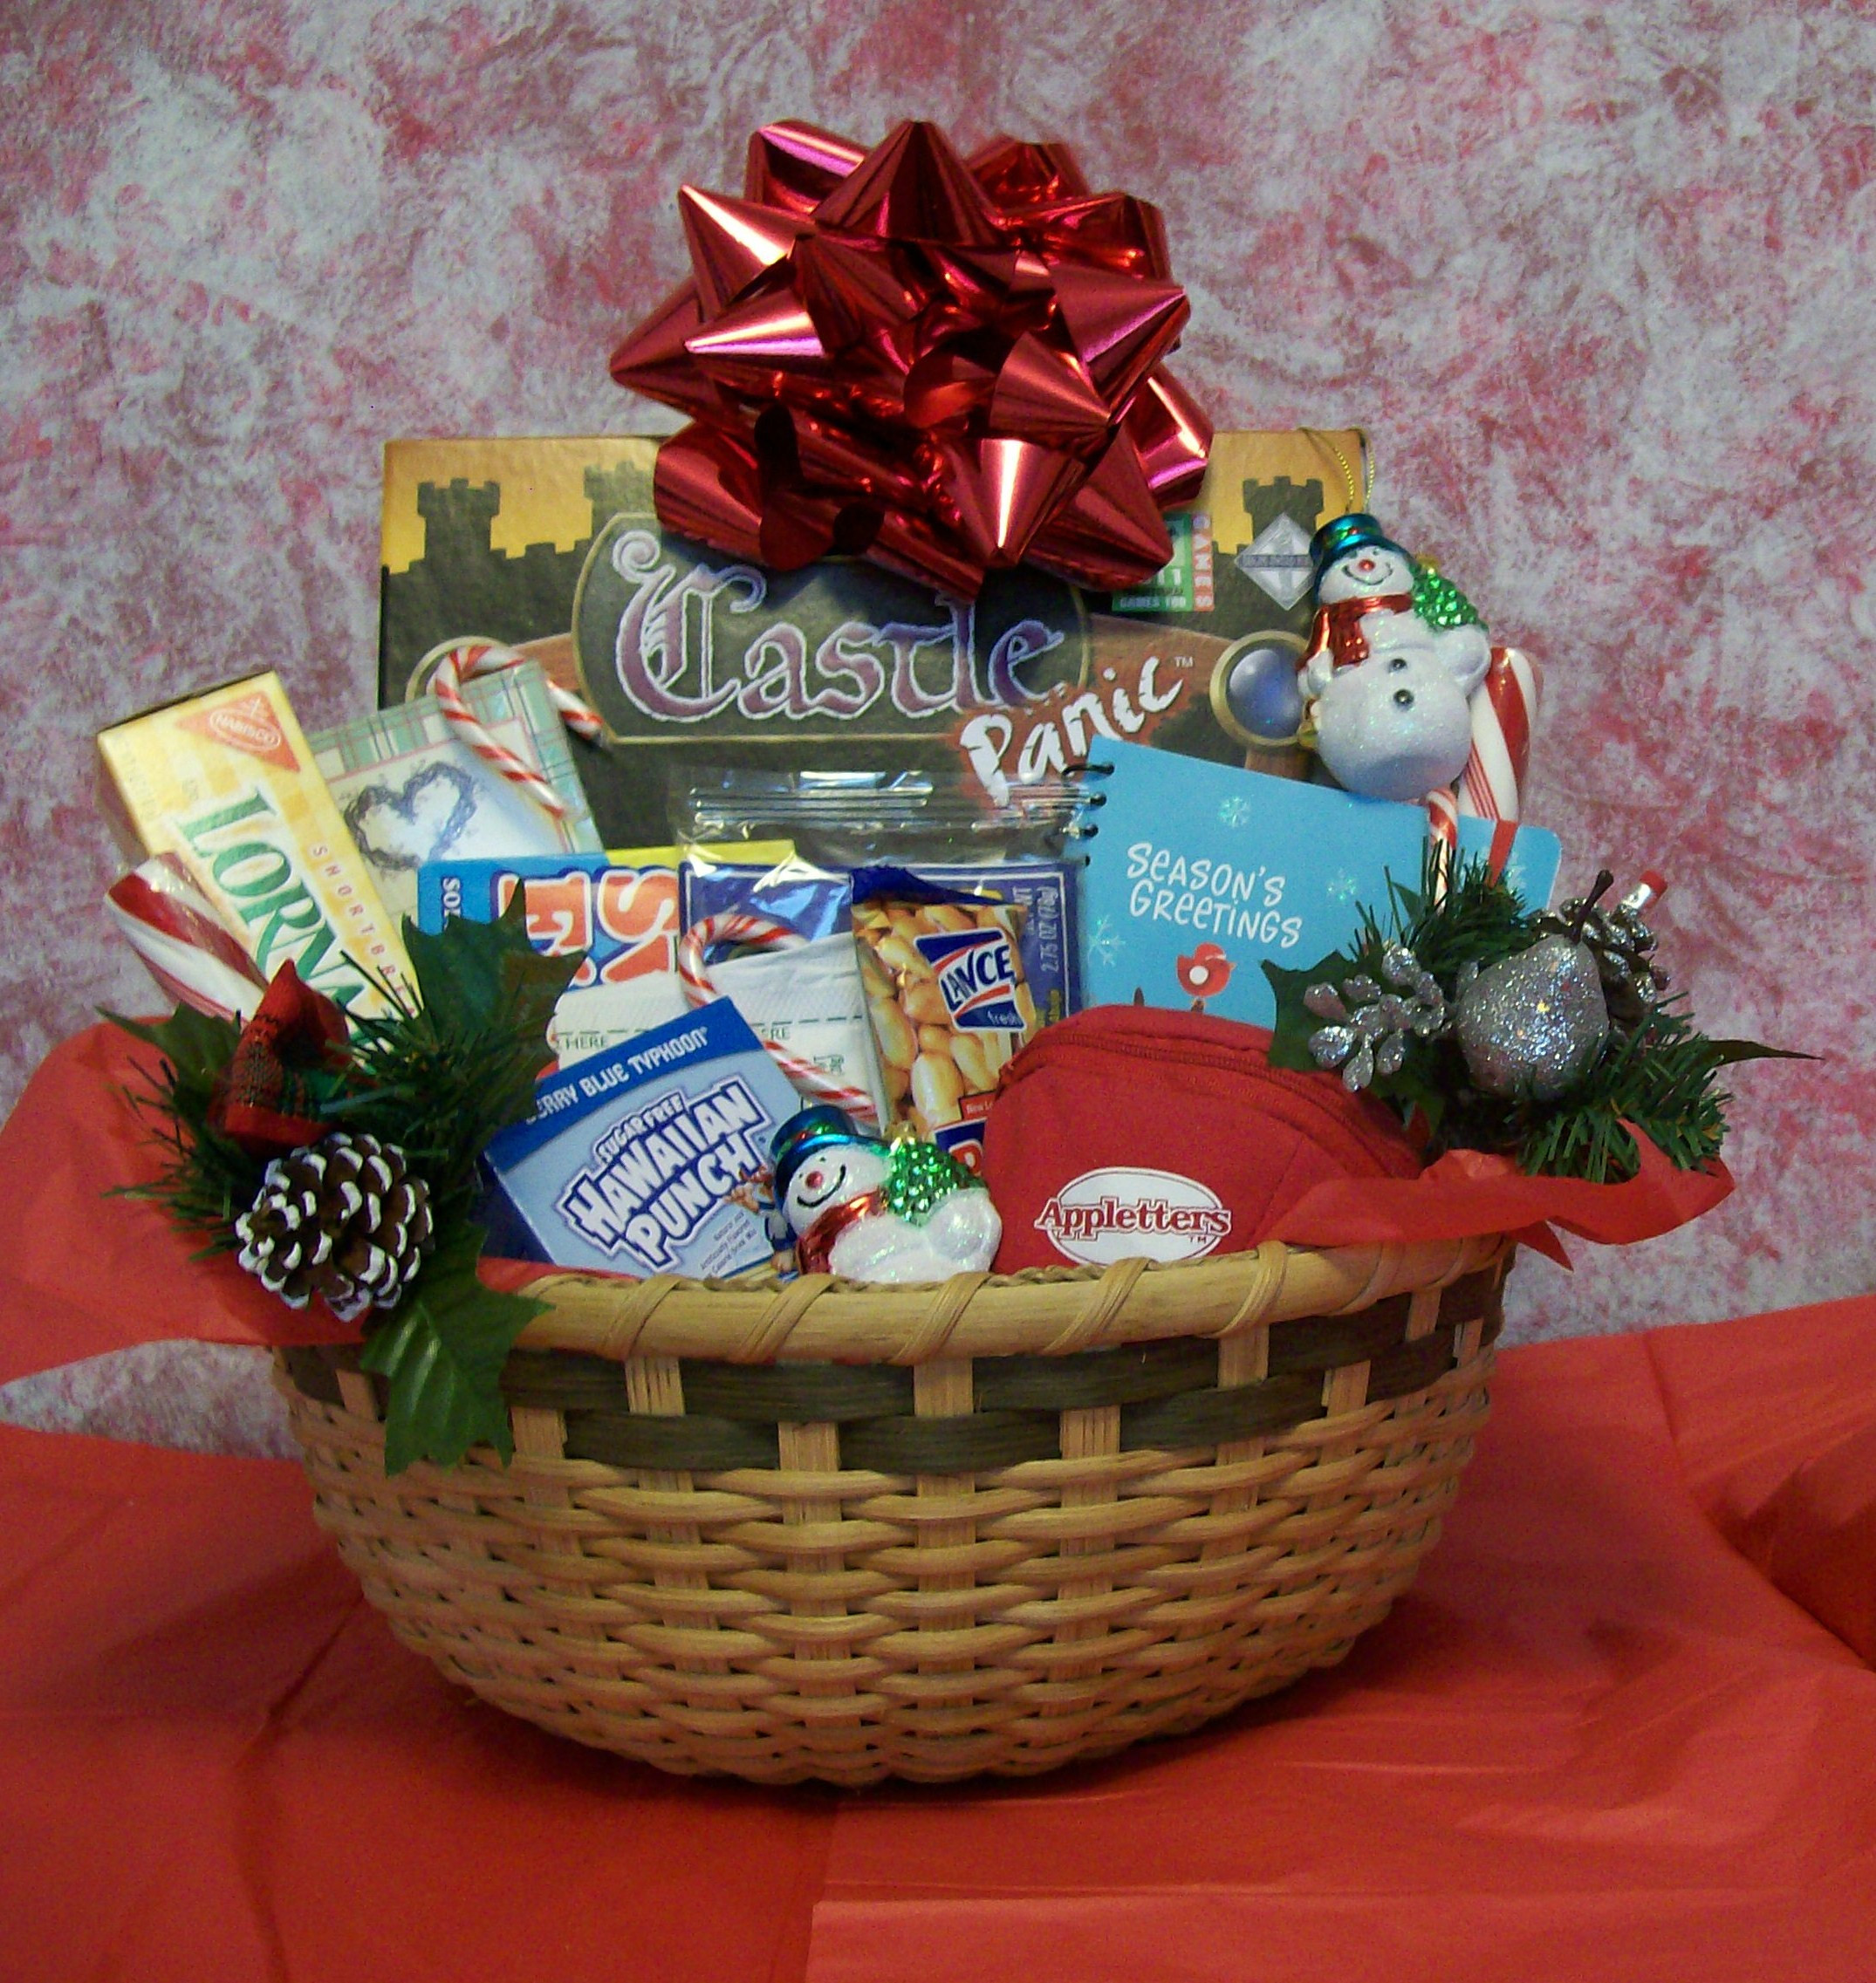 Christmas Gift Ideas For Families
 Create a Christmas Fun and Games Gift Basket for a Family